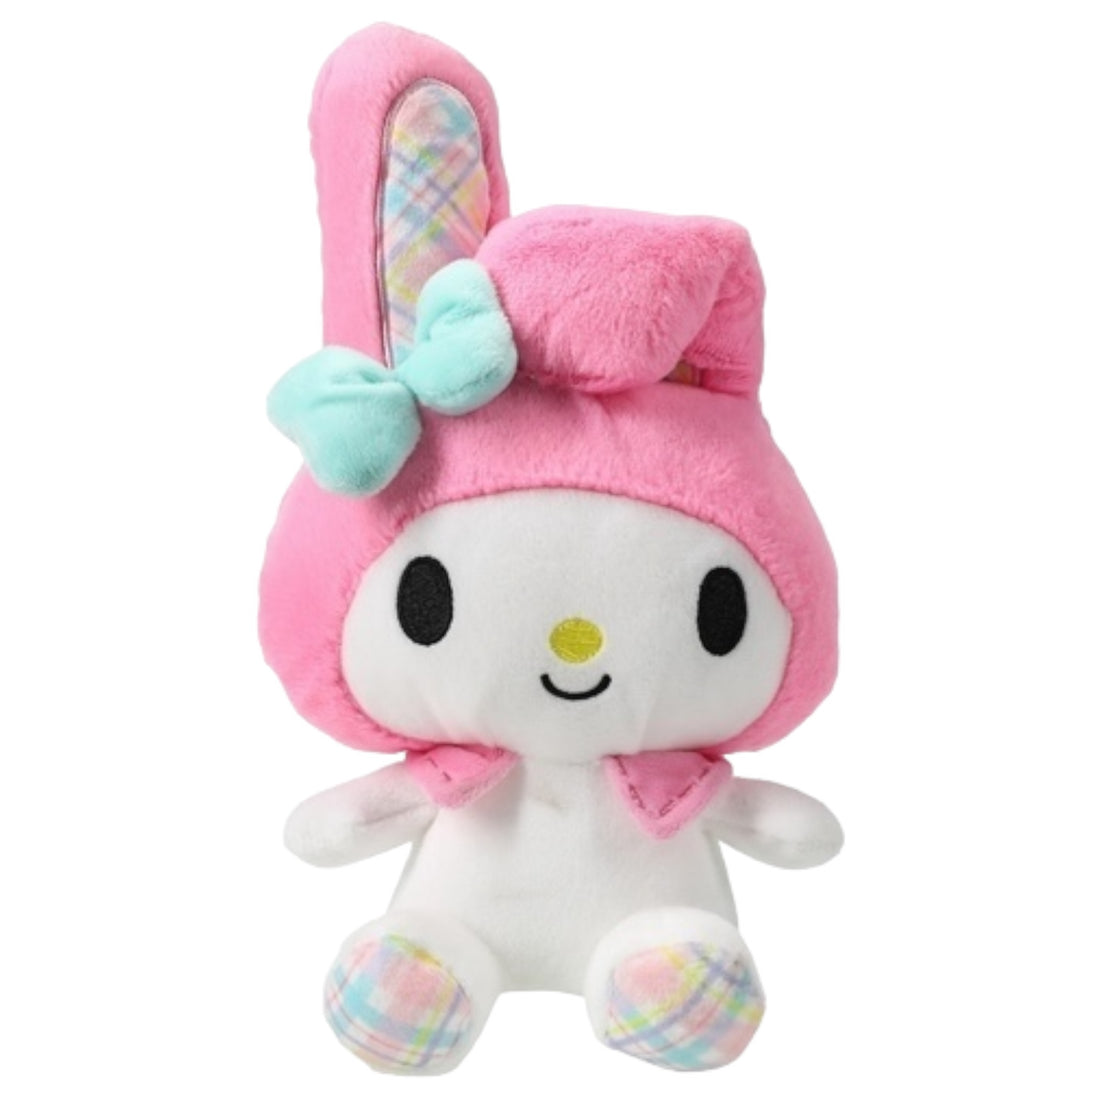 My Melody Easter Plush 11in